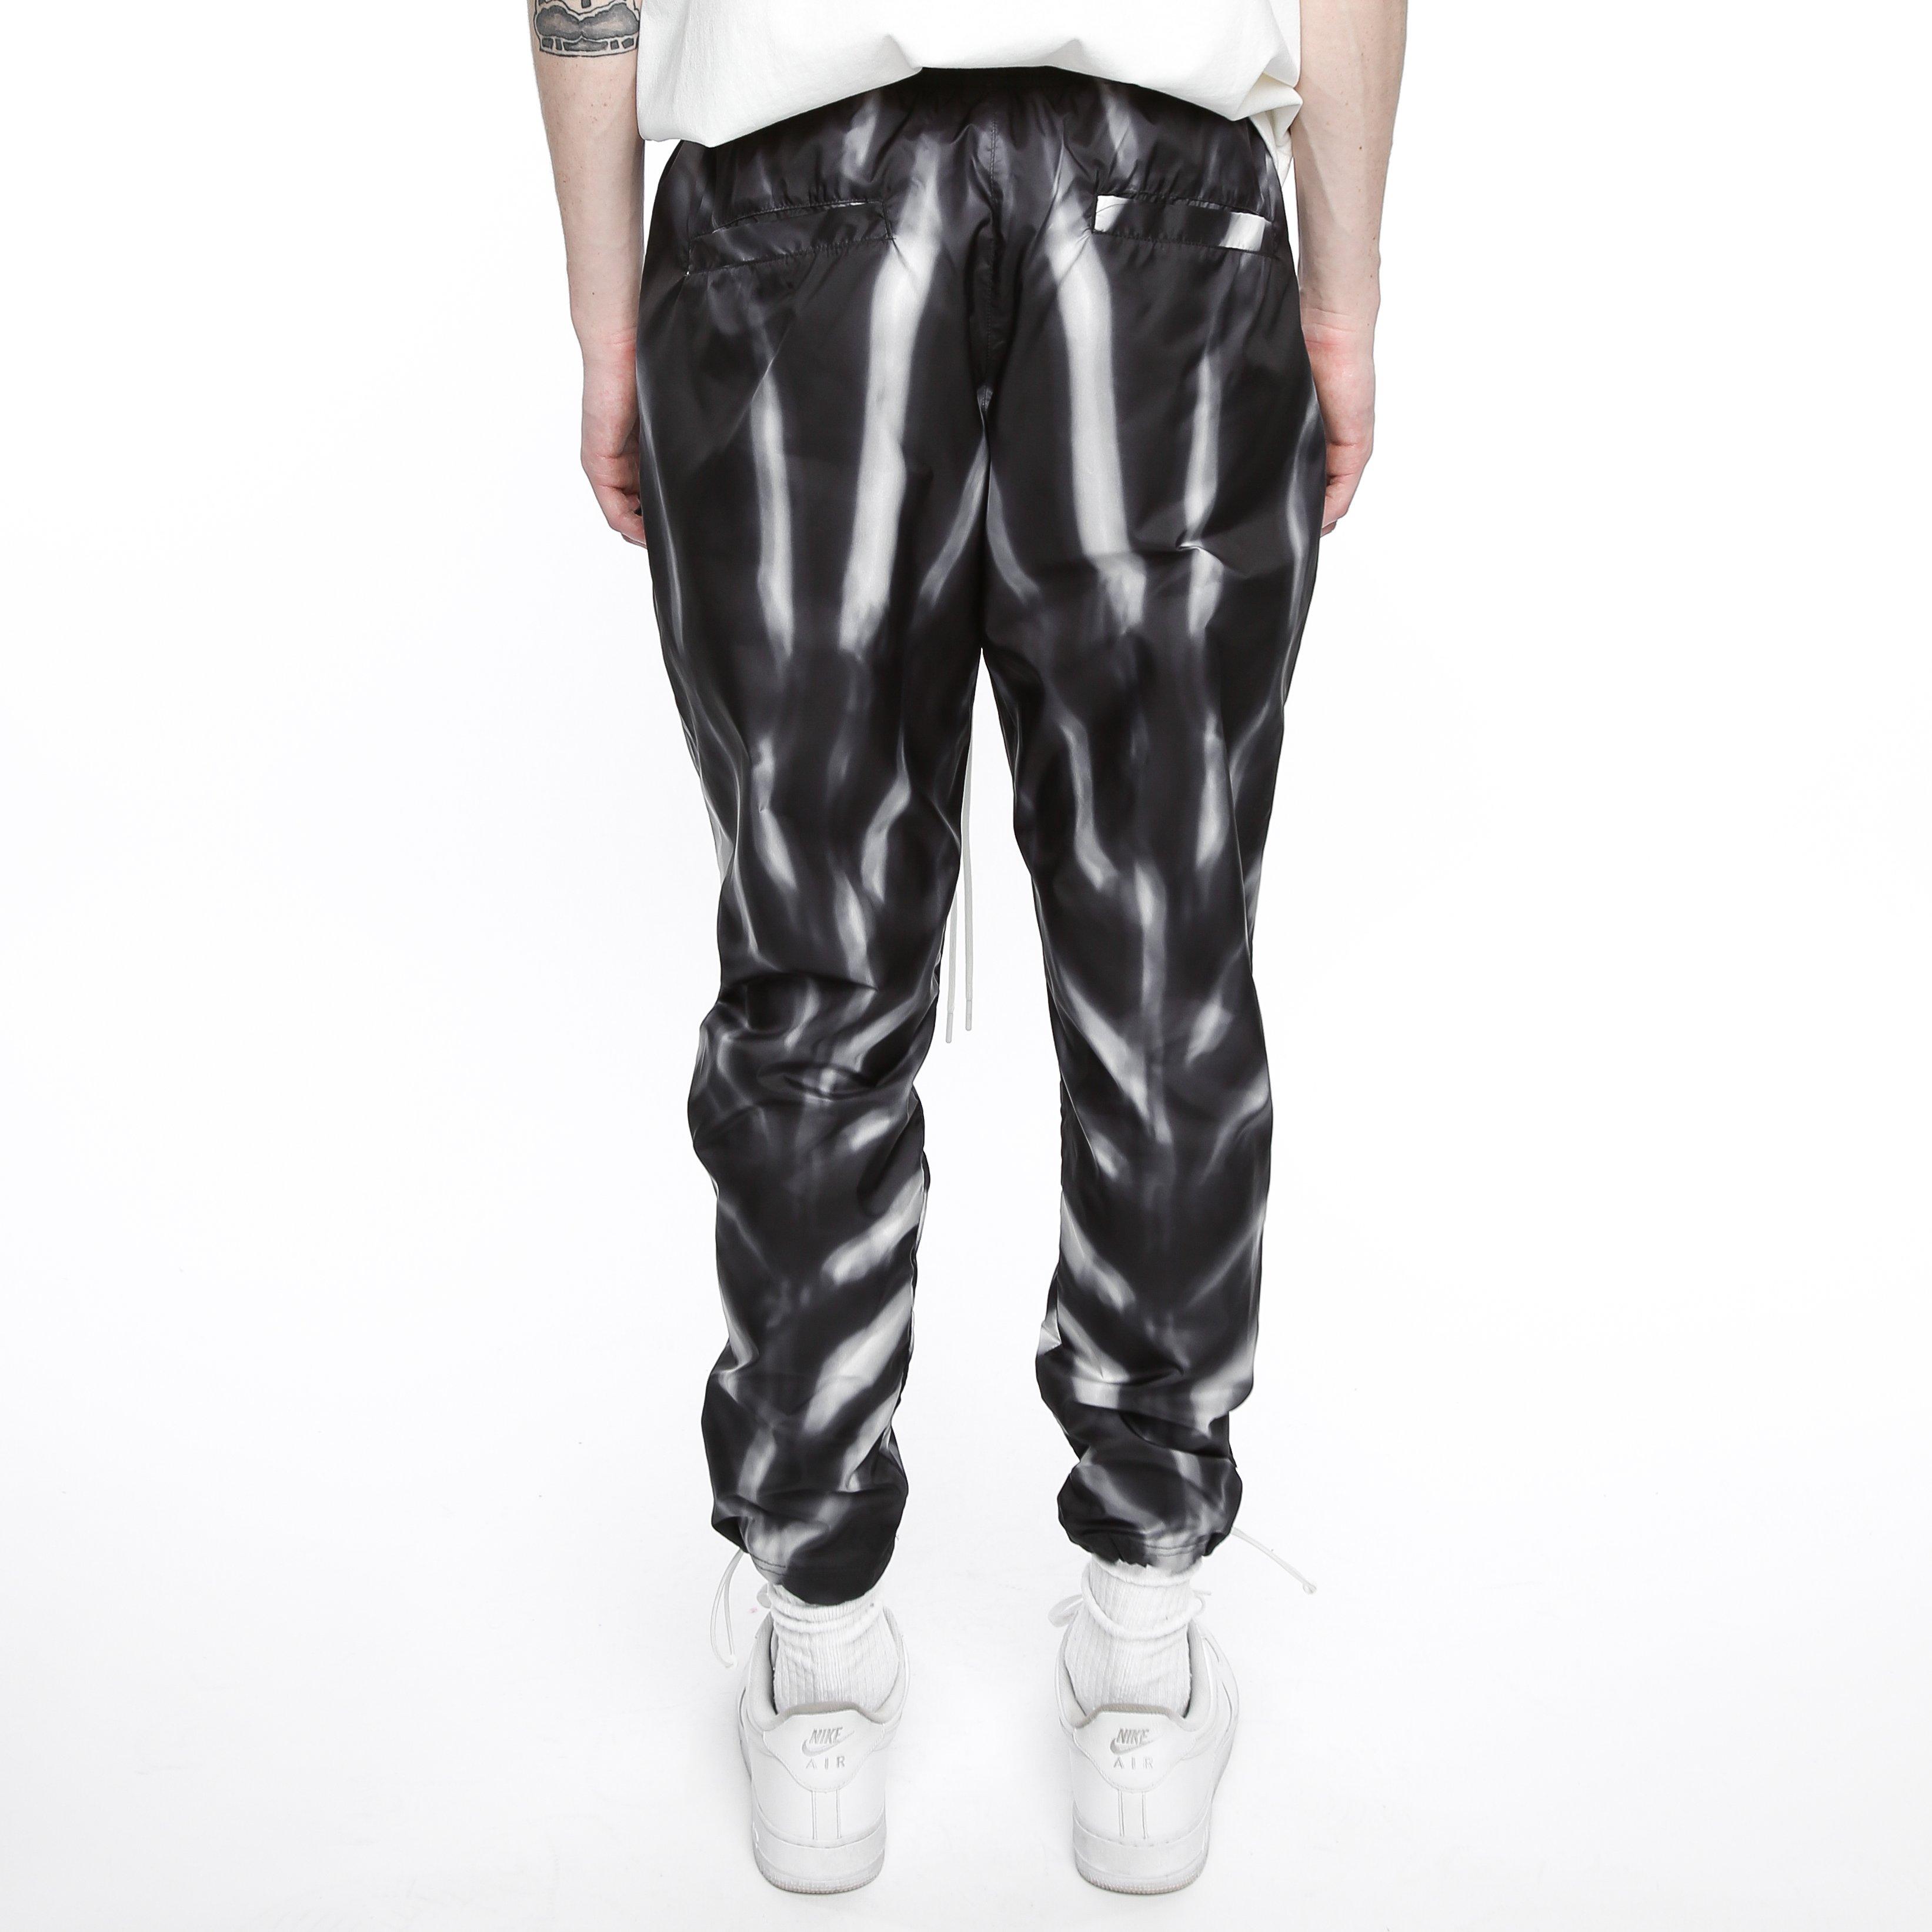 nike fear of god all over print pants